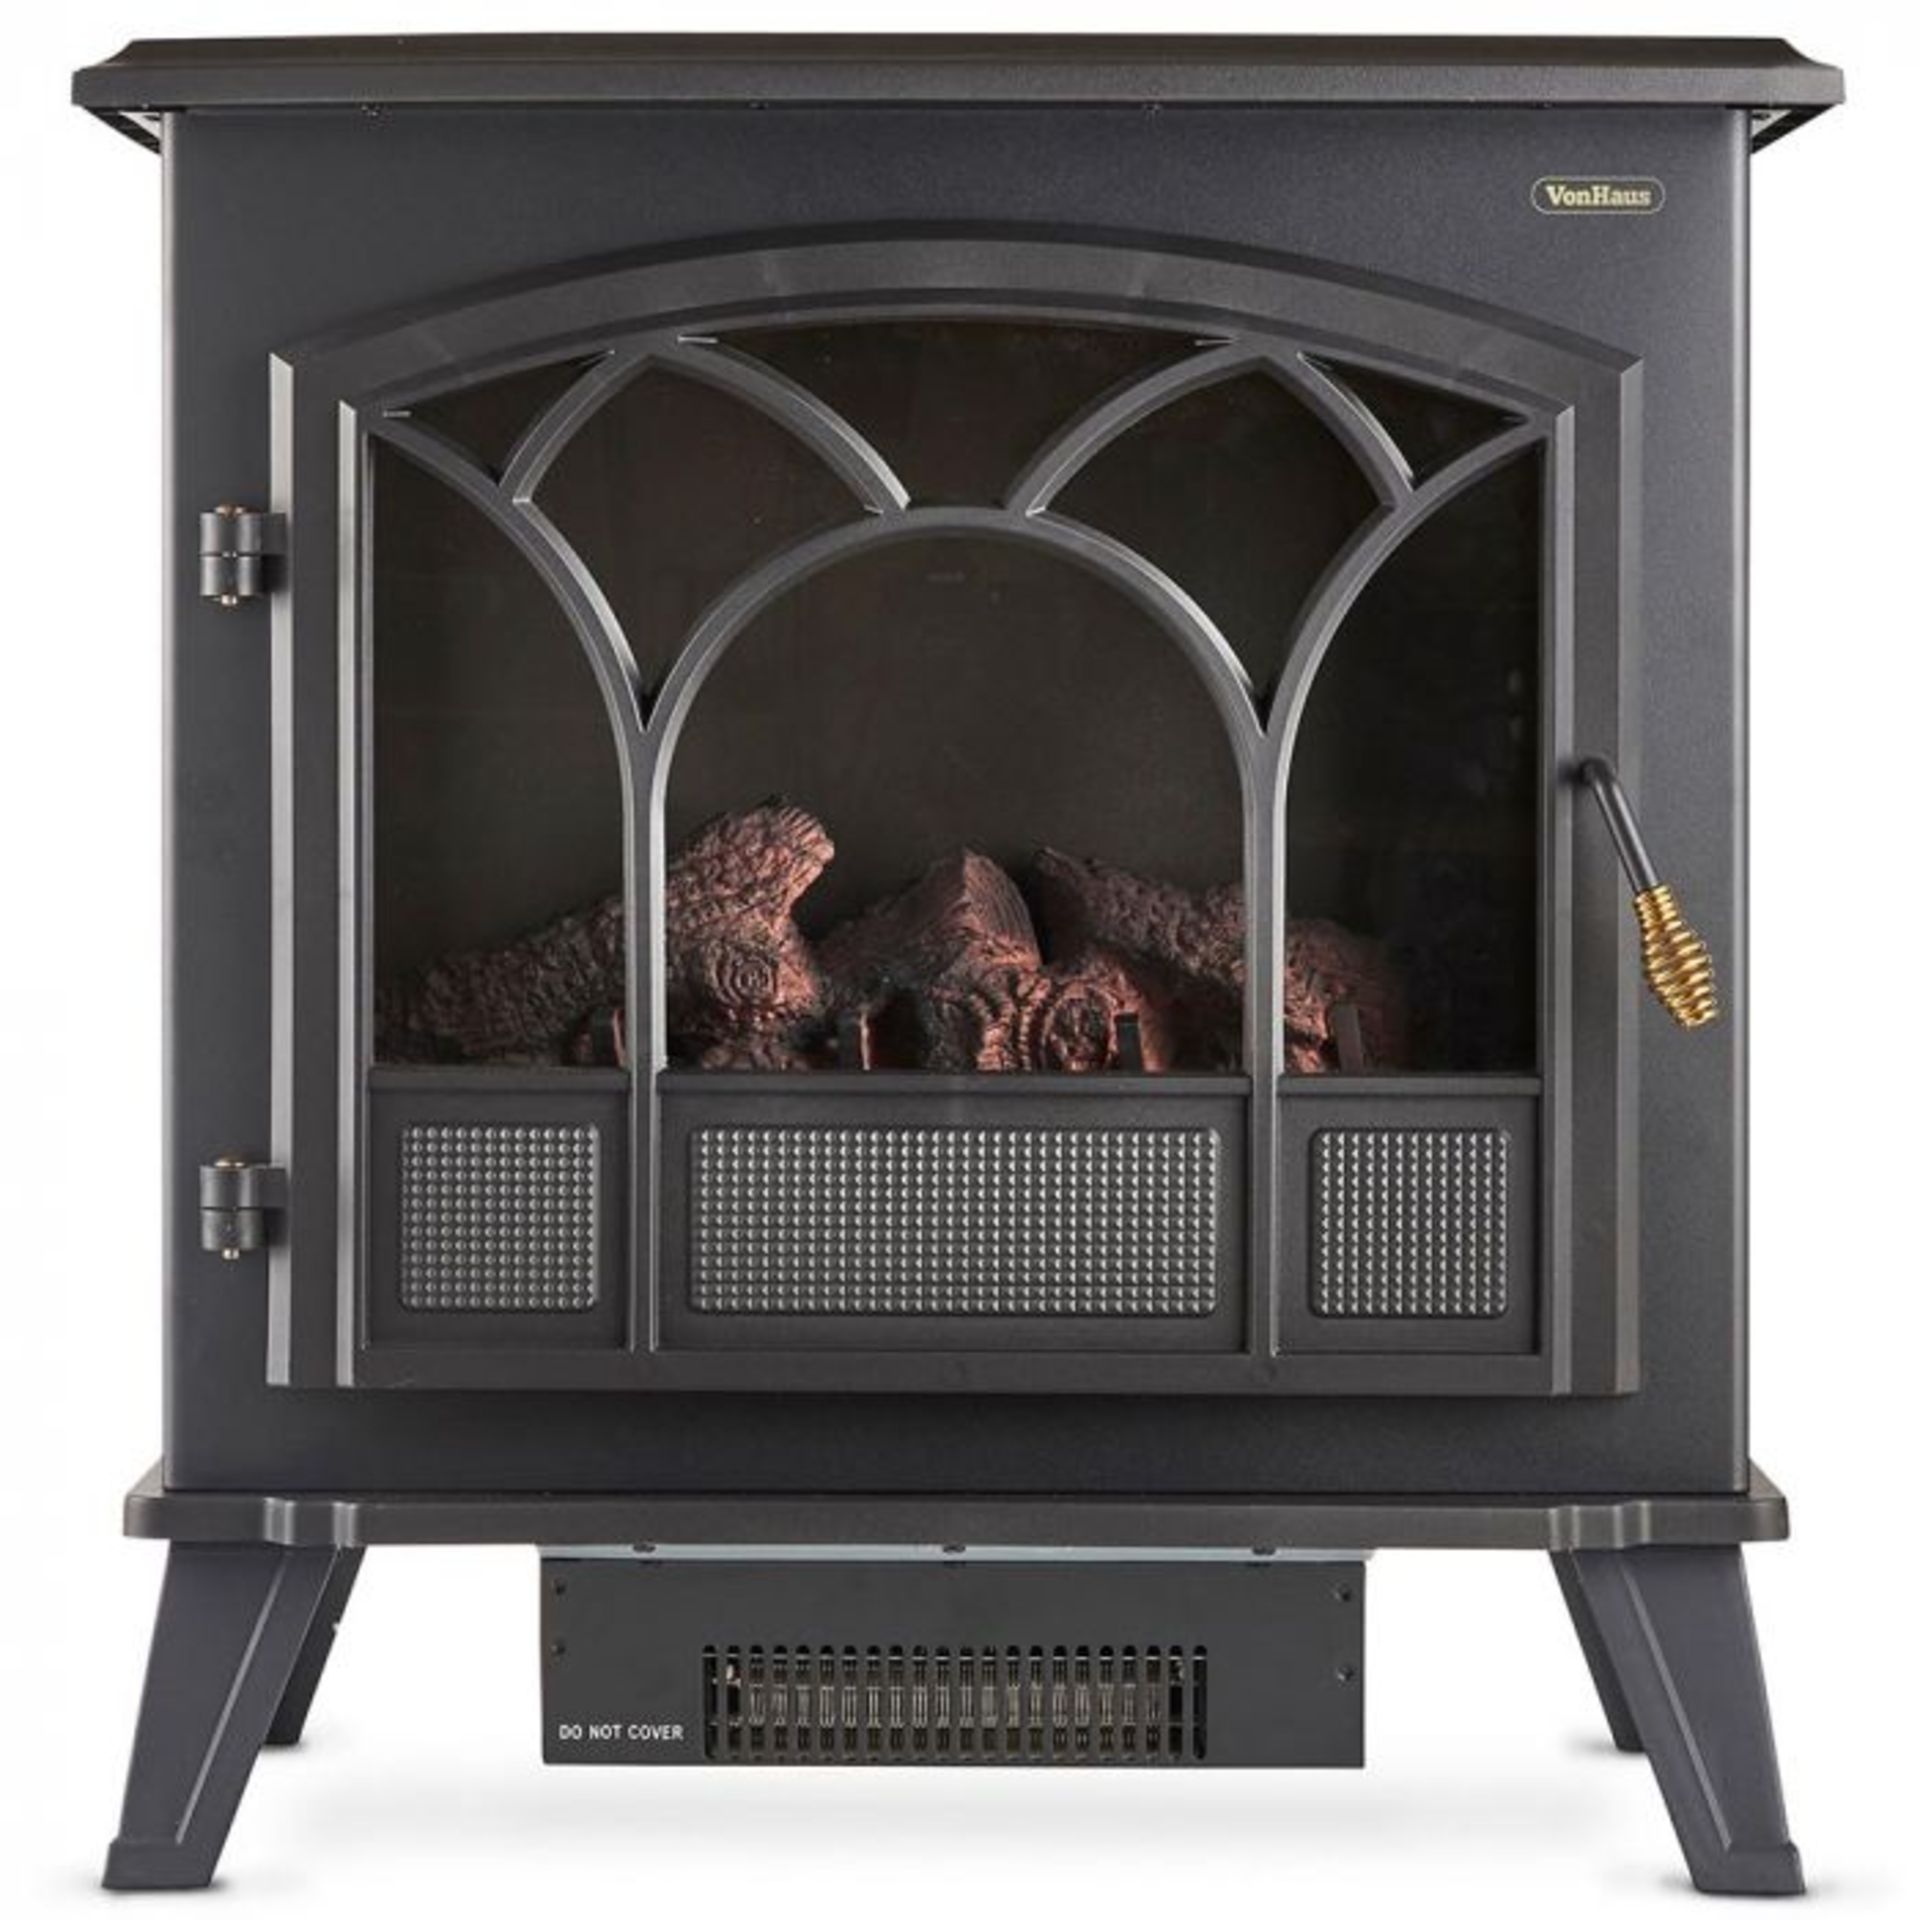 (V41) 1850W Large Black Stove Heater 1850W PORTABLE ELECTRIC STOVE HEATER – classically-desi... - Image 4 of 4